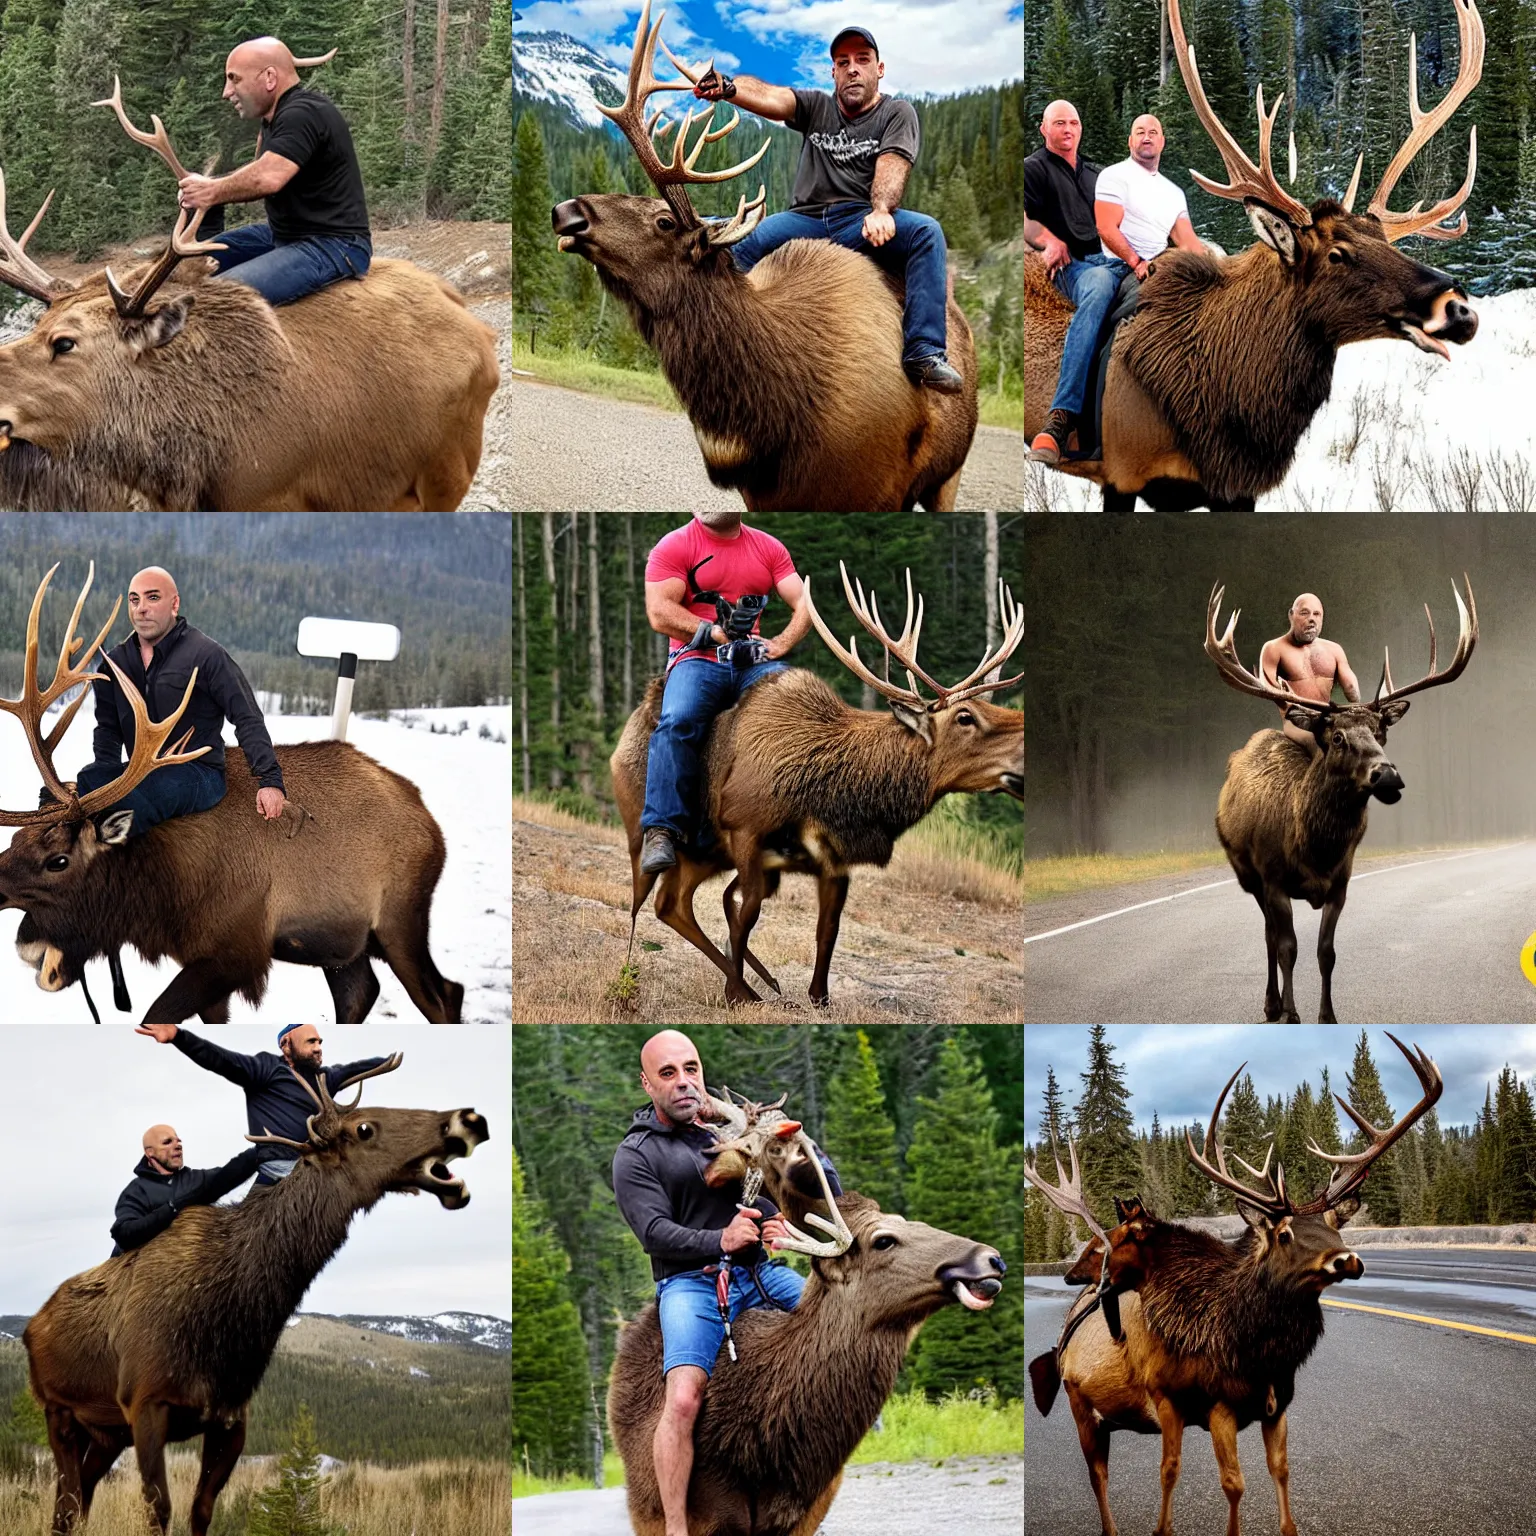 Prompt: Joe Rogan riding on the back of an elk holding a giant syringe of ivermectin